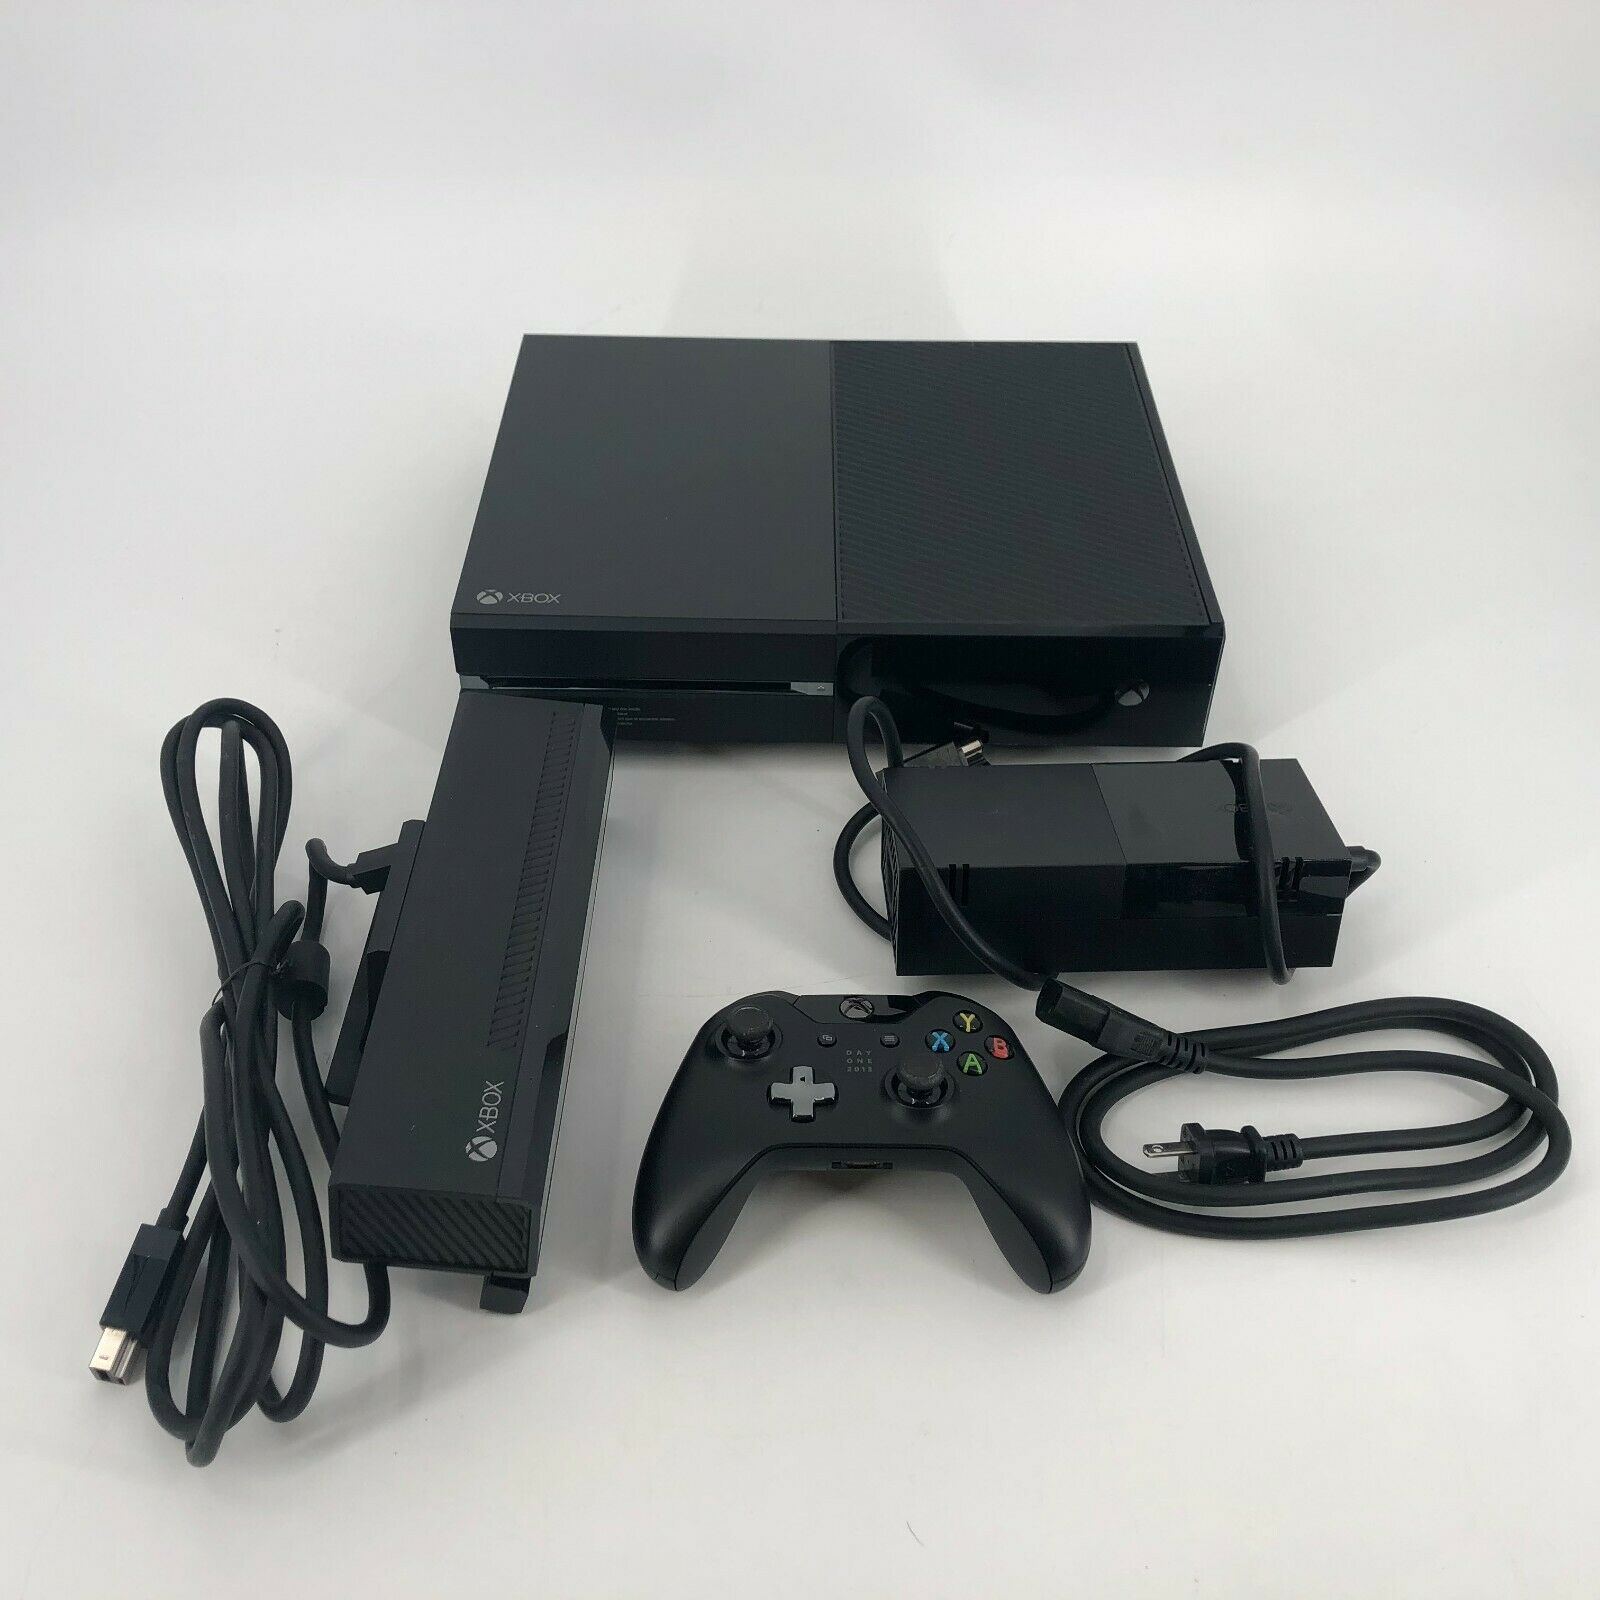 Microsoft Xbox One Day One Edition 500GB Black Console with 4 Games Included